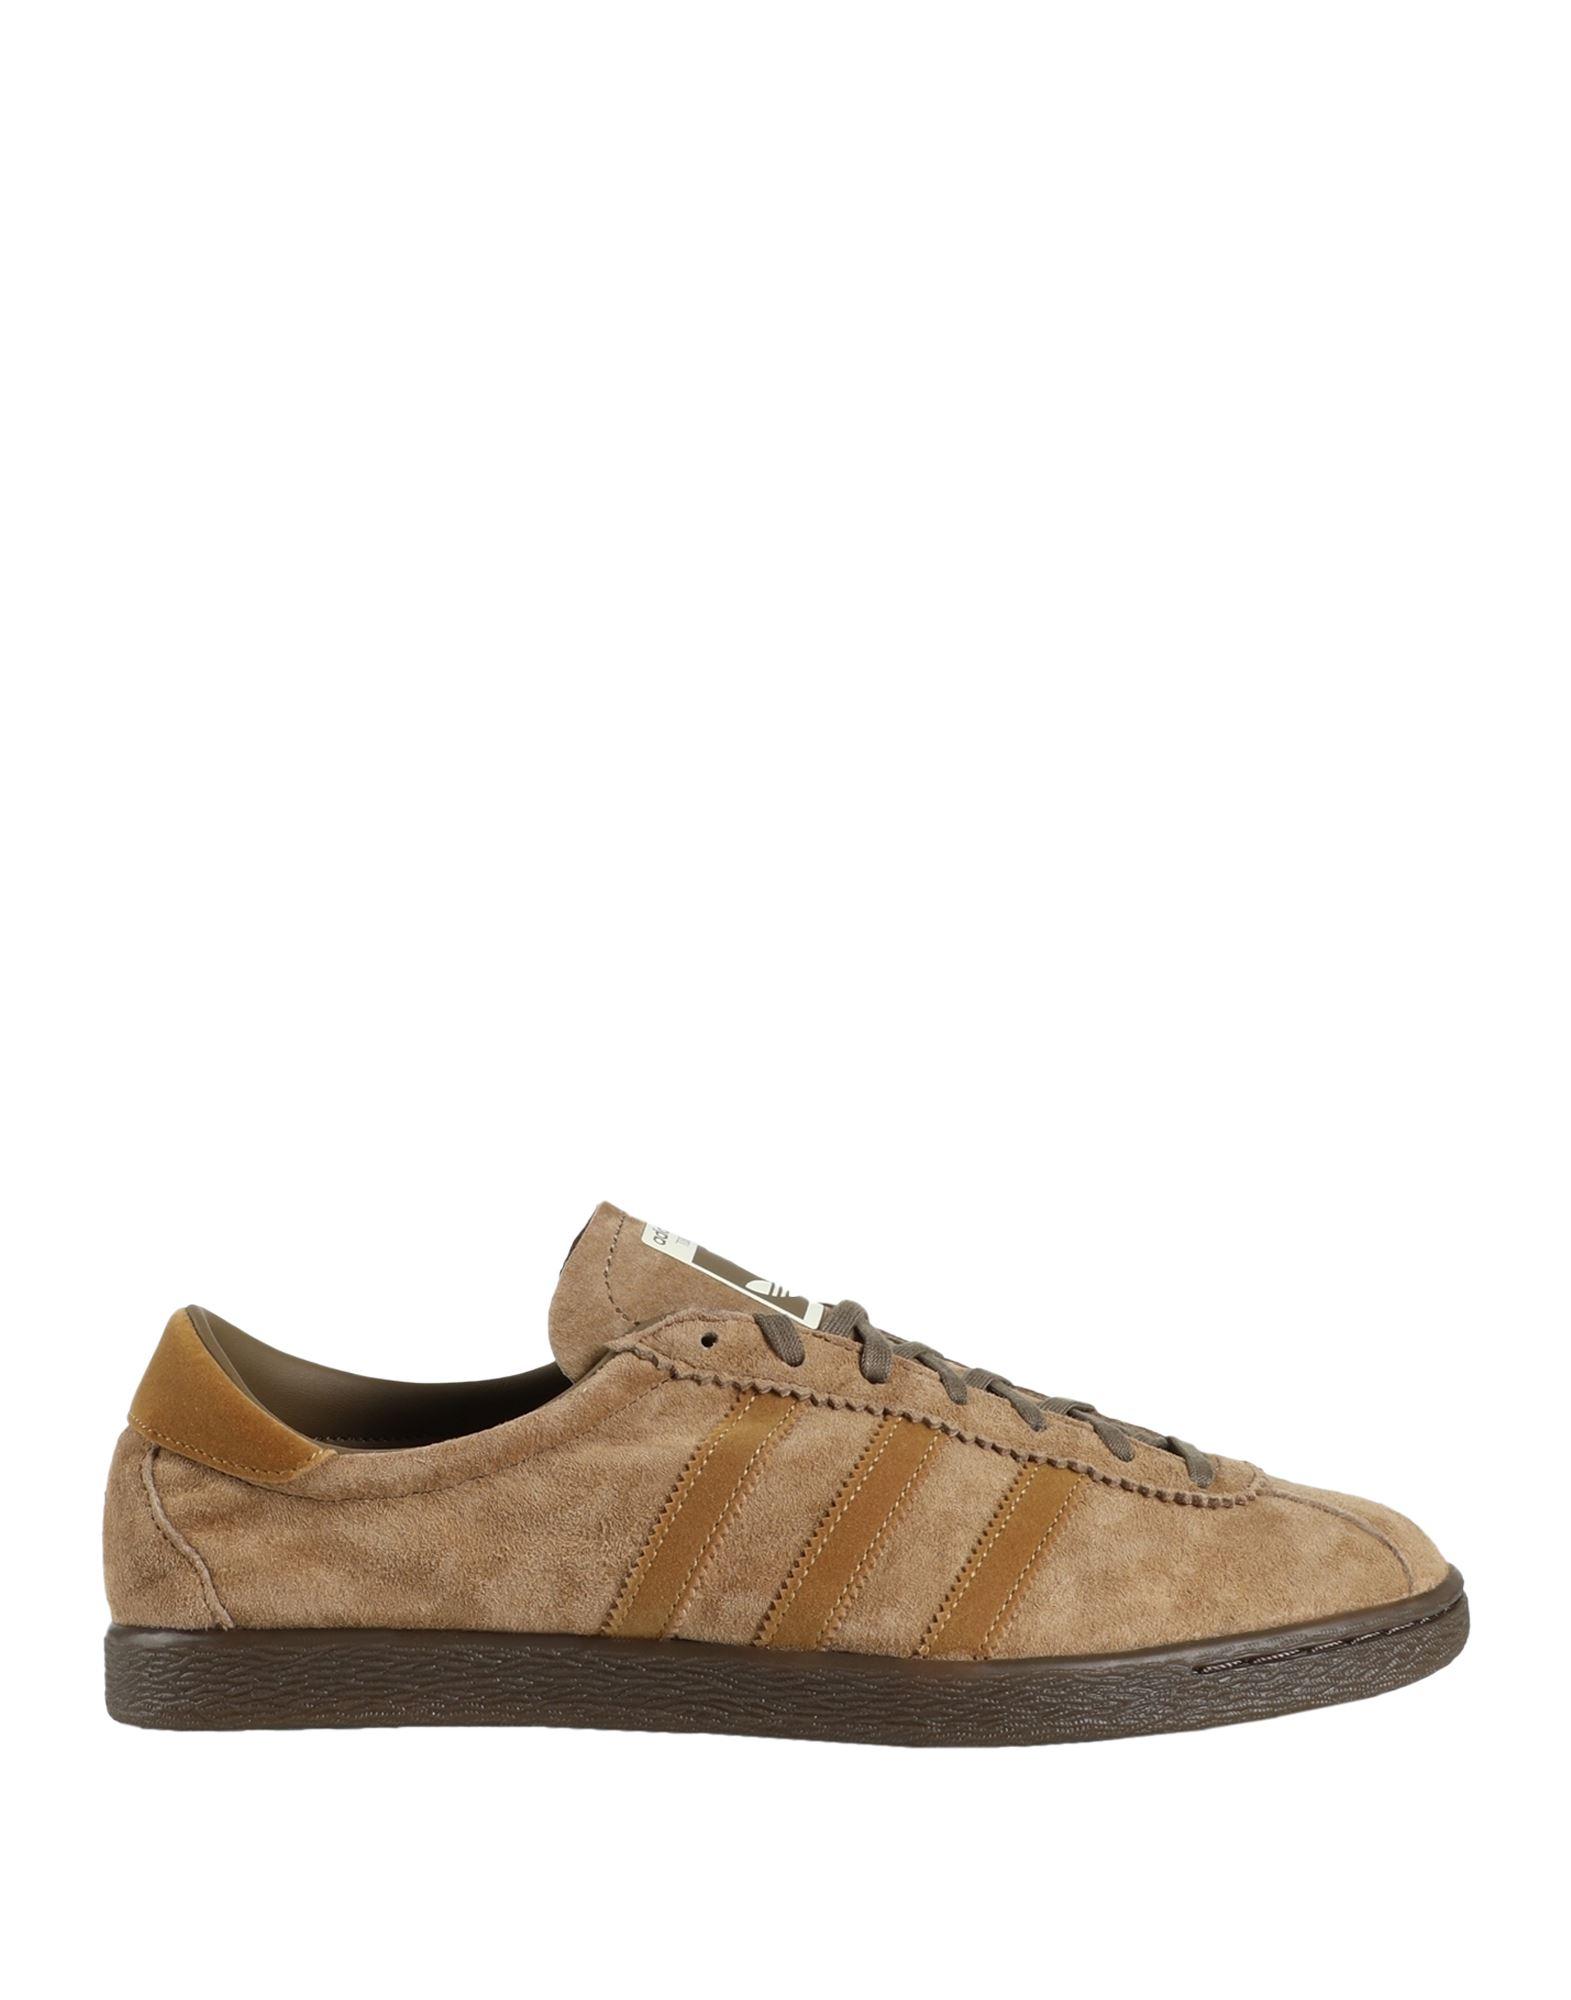 adidas Originals Trainers in Brown for Men | Lyst